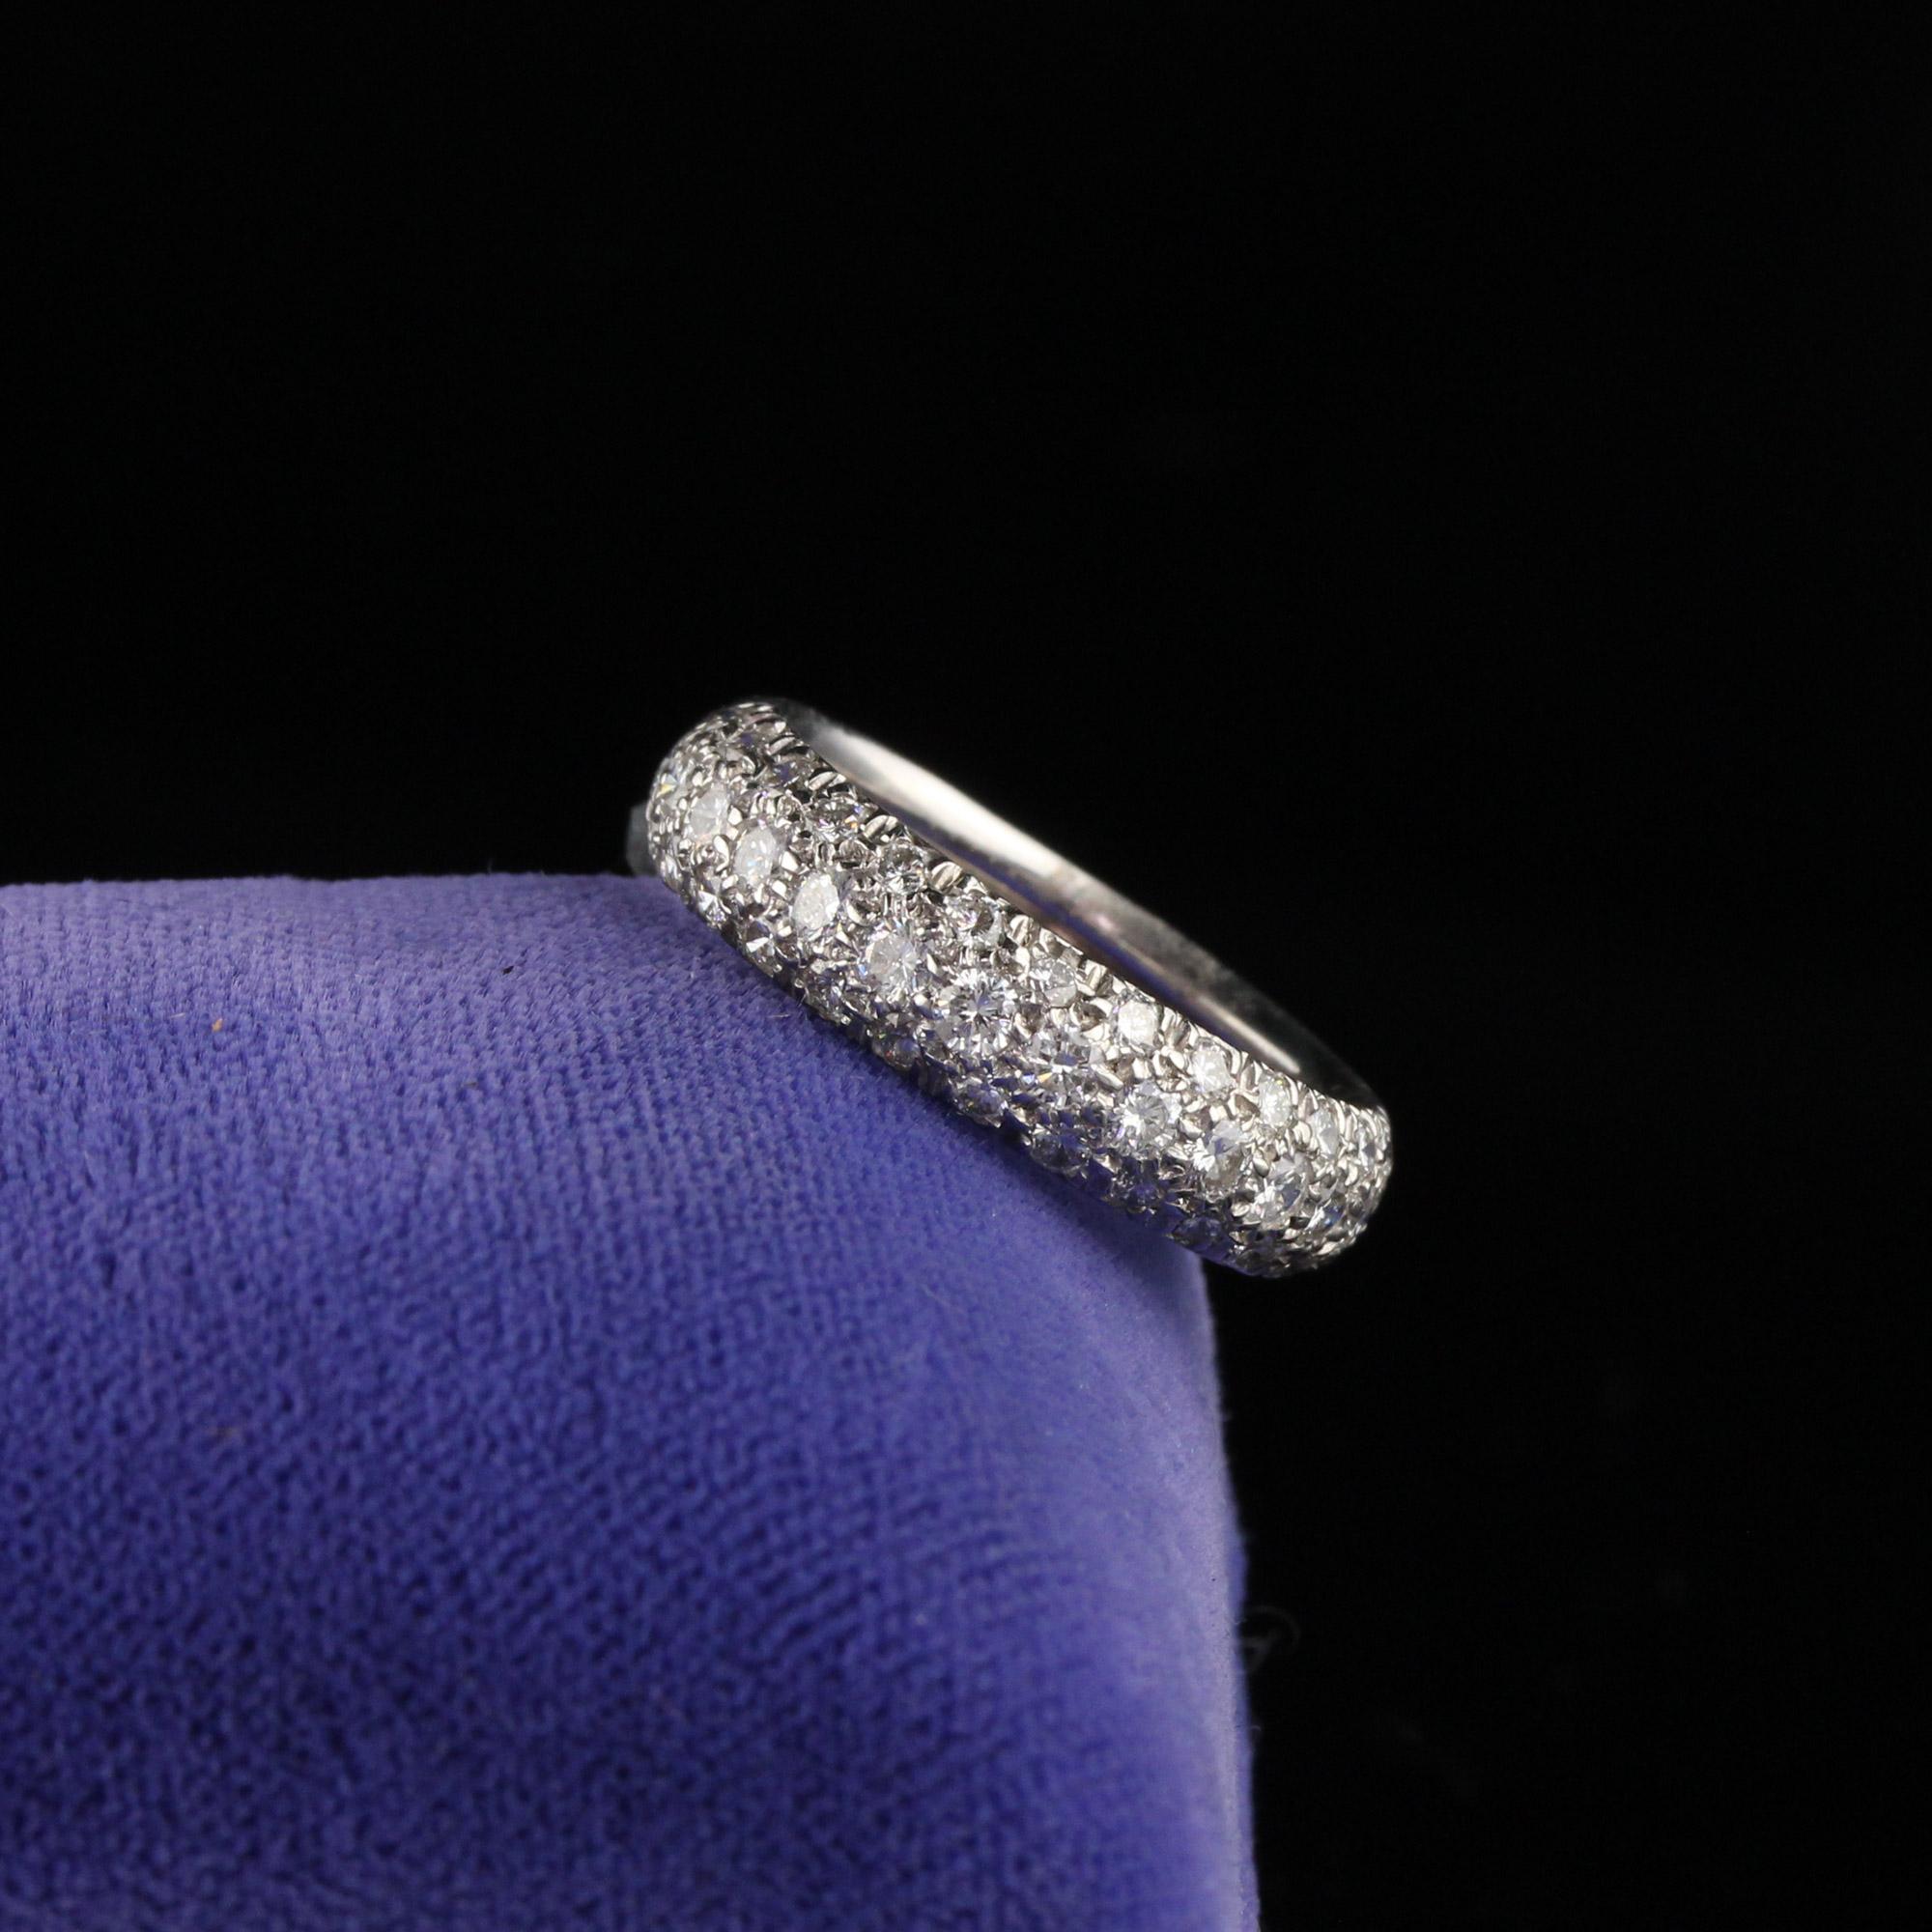 Bold and beautiful diamond band.

Metal: 14K White Gold

Weight: 4.0 Grams

Total Diamond Weight: Approximately 0.70 ct.

Diamond Color: H

Diamond Clarity: SI1

Ring Size: 5 (sizable)

Measurements: 4.89 x 2.66 mm